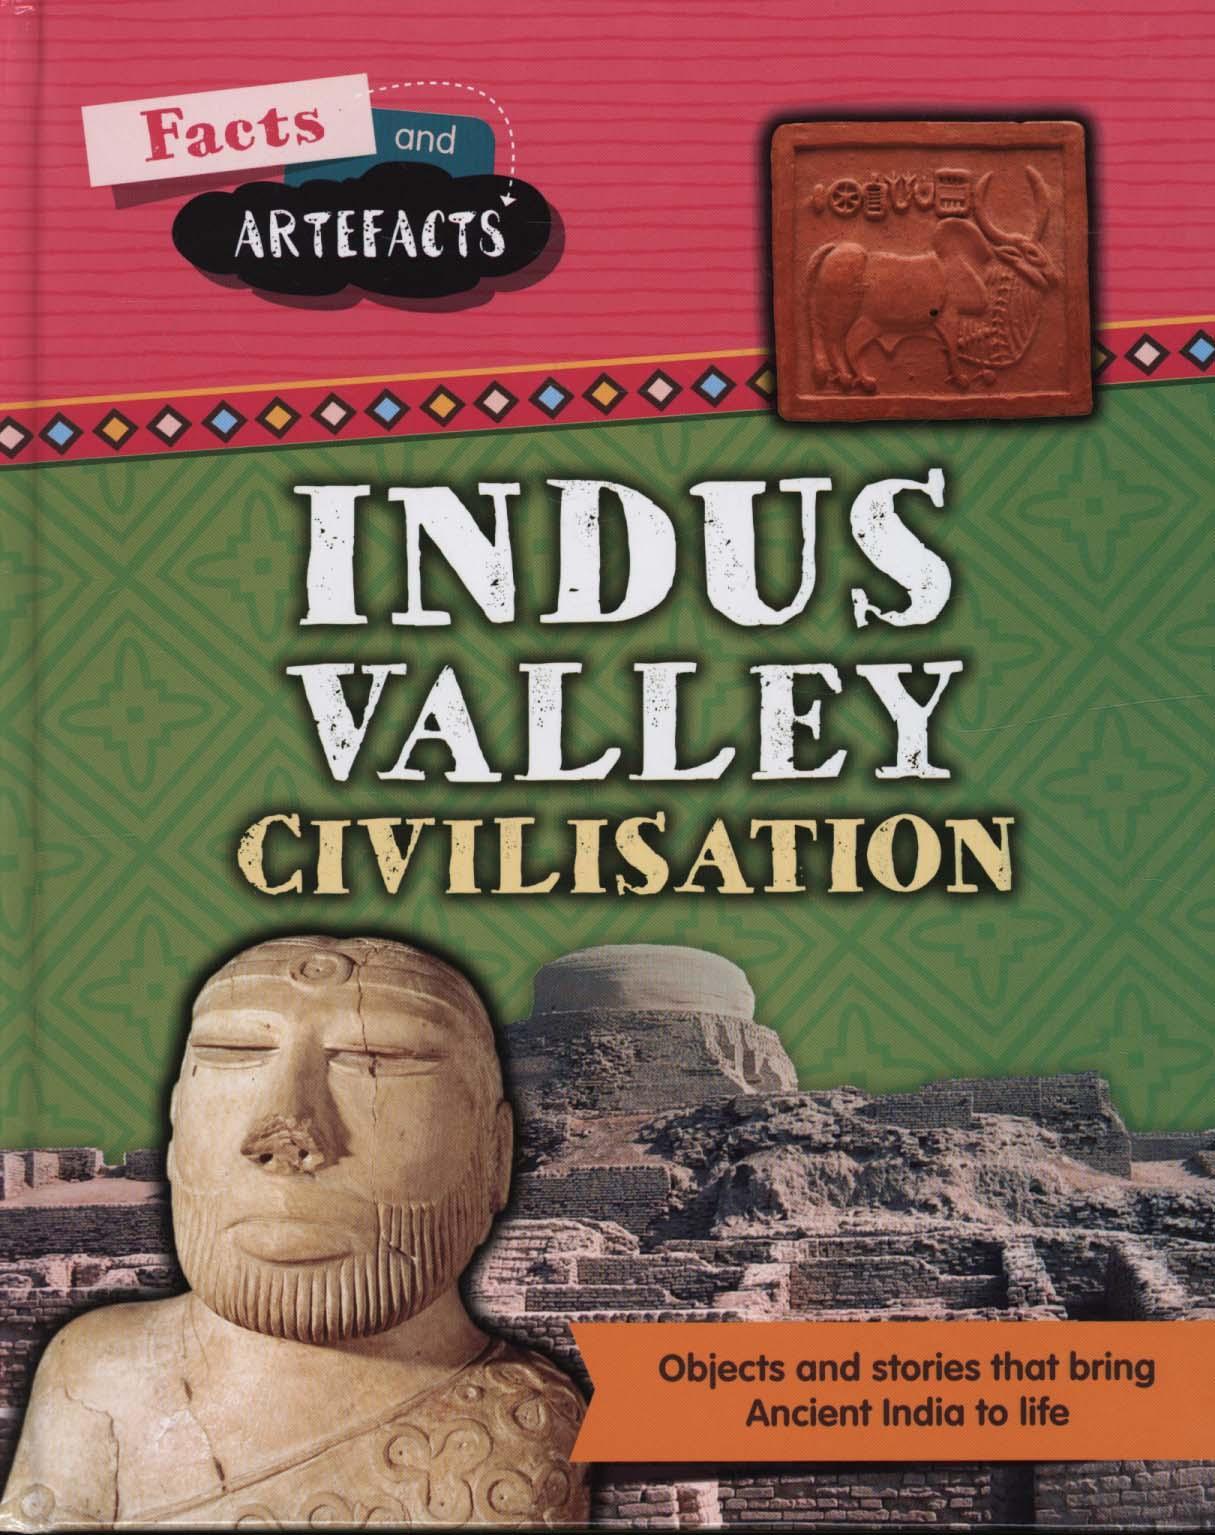 Facts and Artefacts: Indus Valley Civilisation